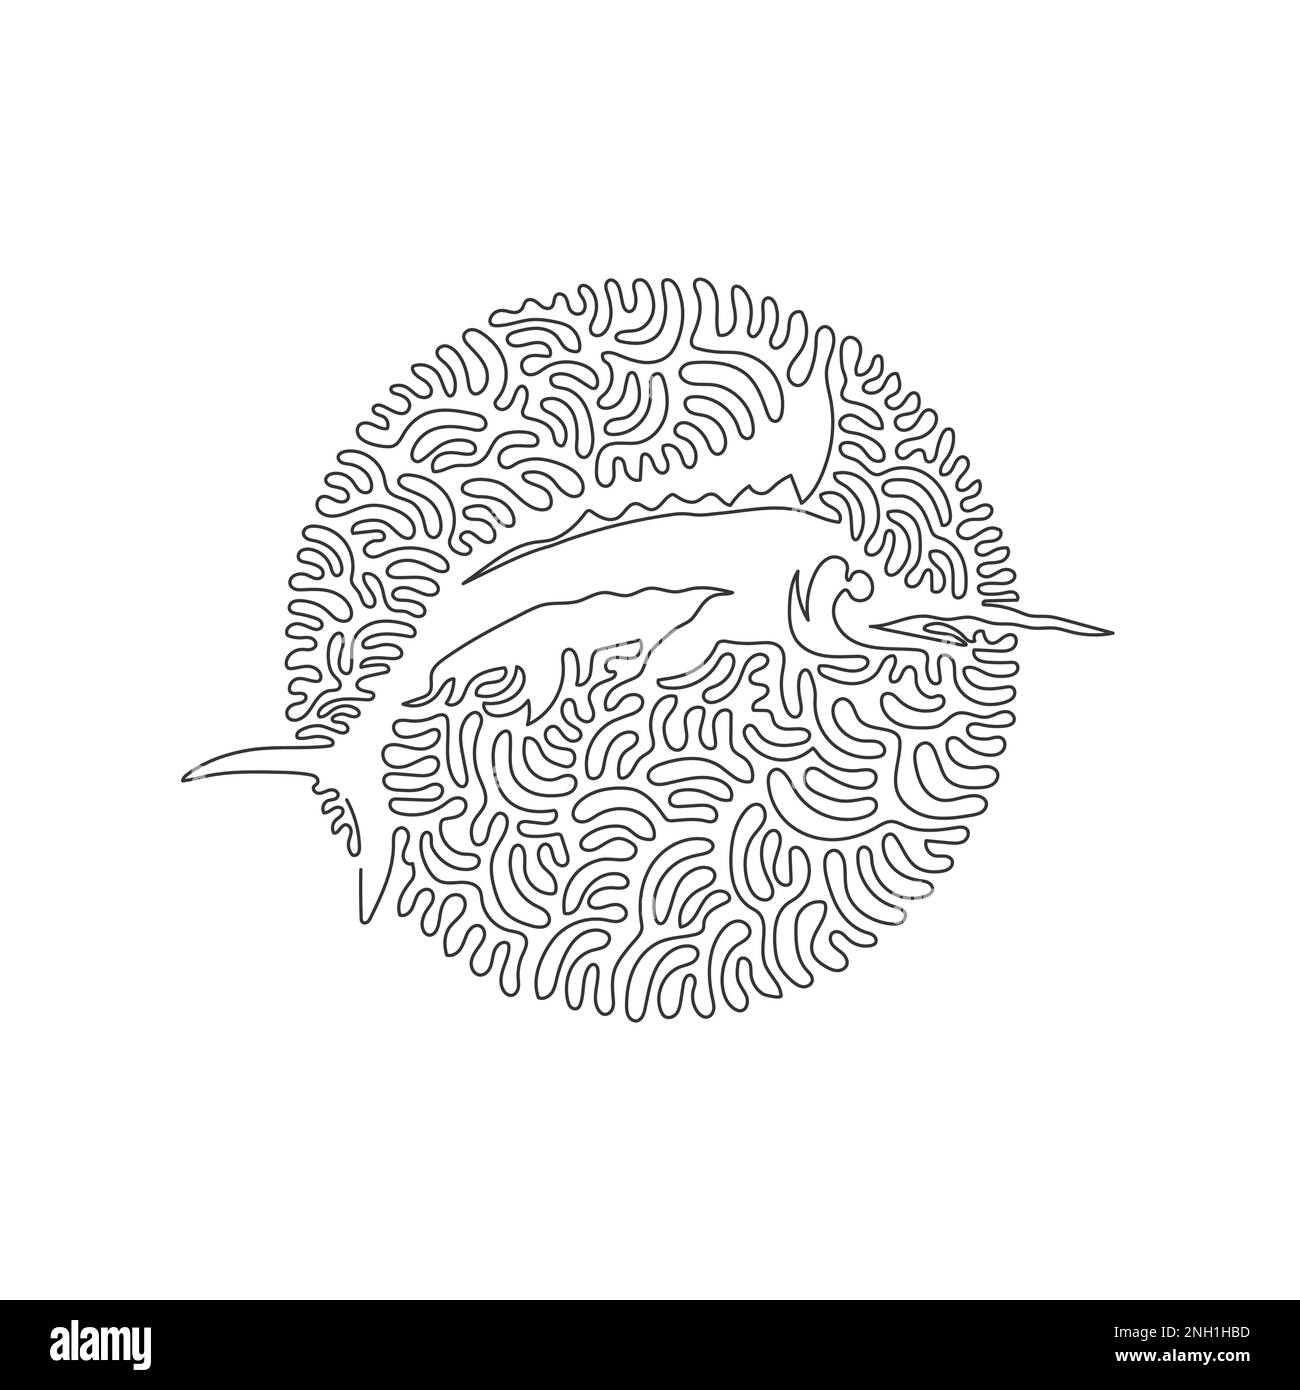 Single swirl continuous line drawing of marlin long dorsal fin abstract art. Continuous line draw design vector illustration style of marlin Stock Vector